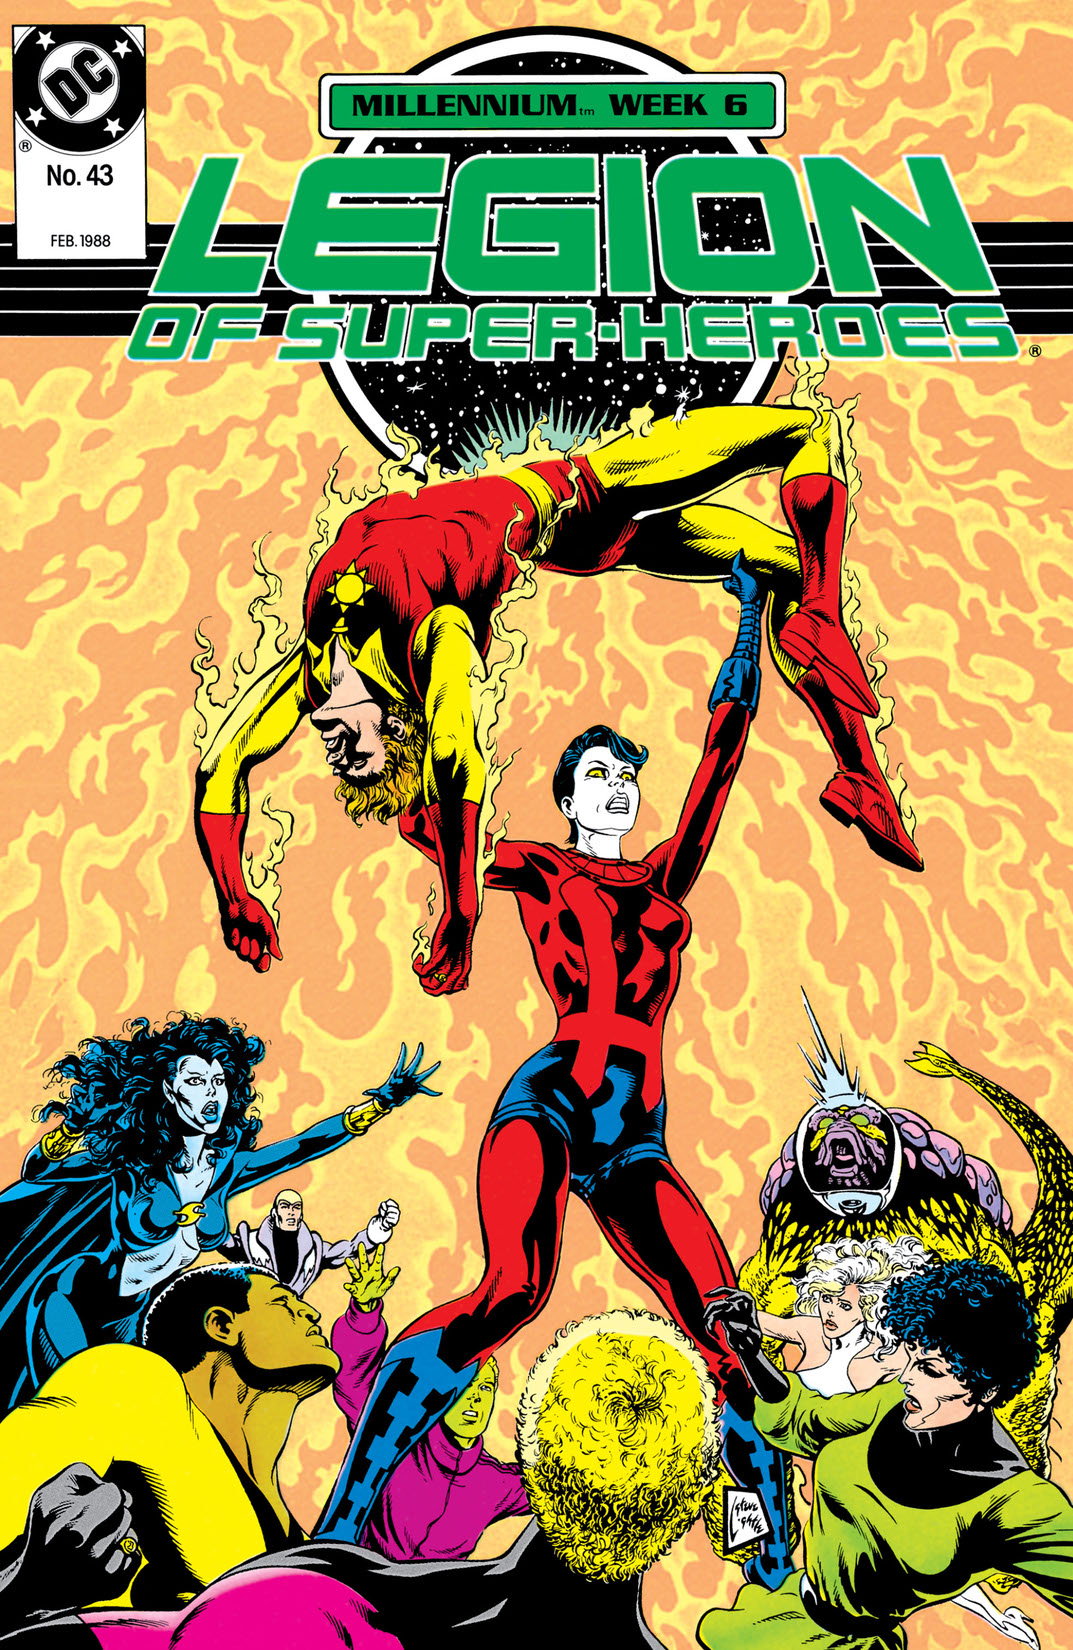 Legion of Super-Heroes (1984-) #43 preview images